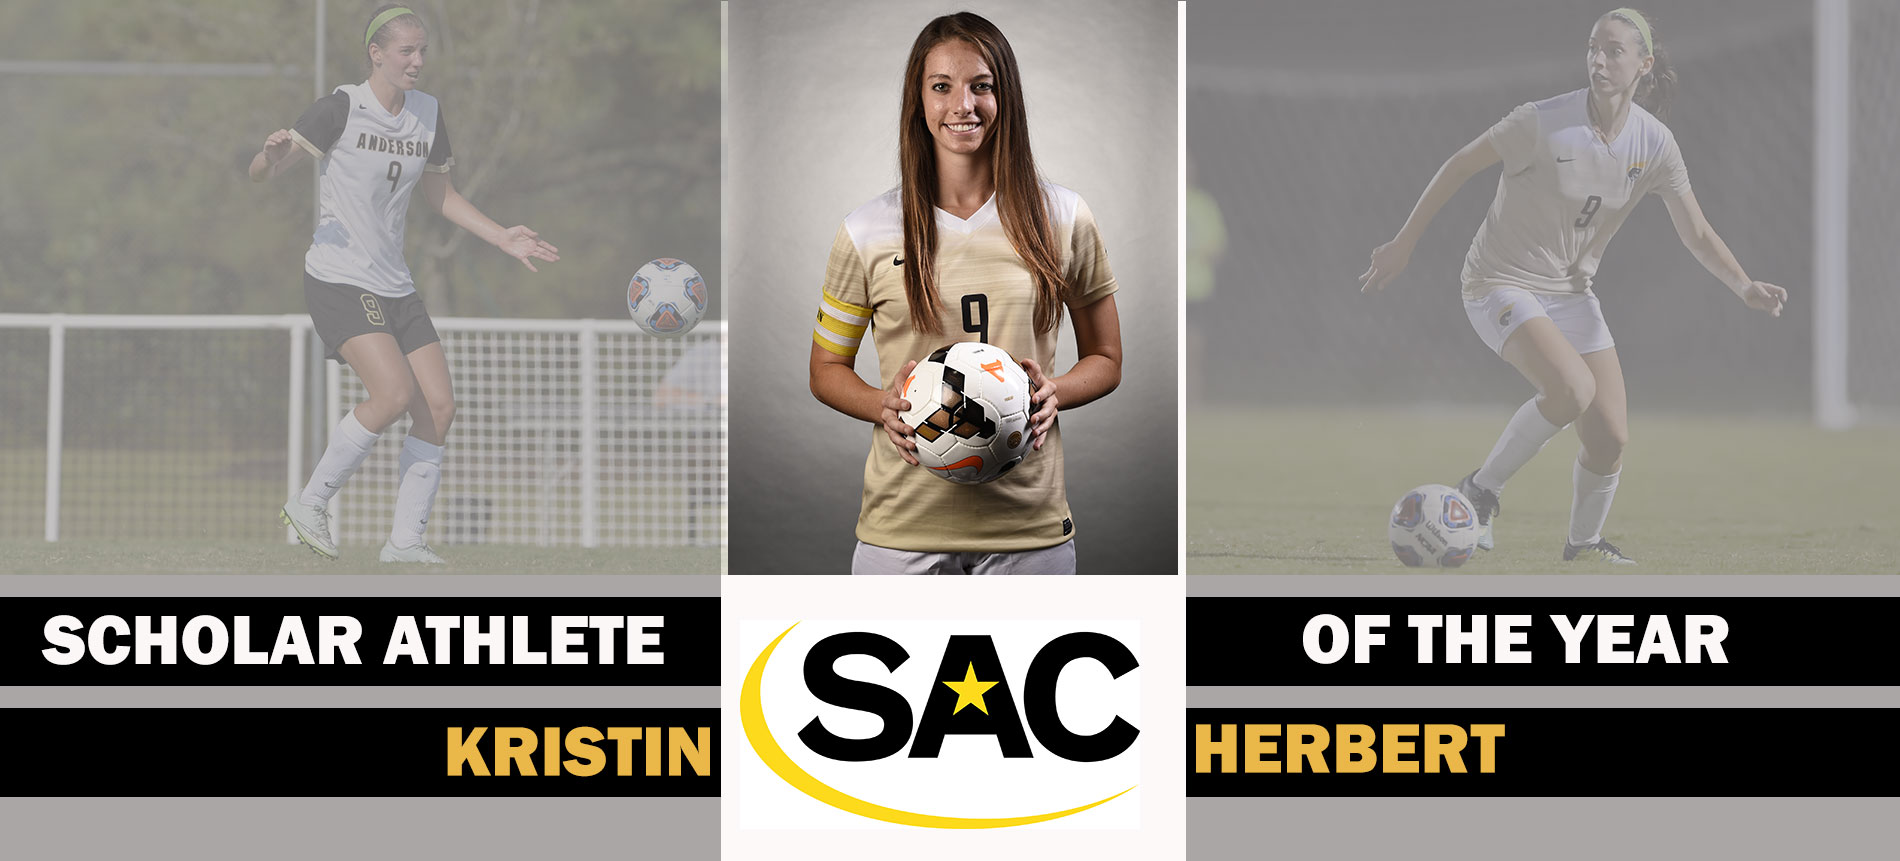 Herbert Earns South Atlantic Conference Women’s Soccer Scholar Athlete of the Year